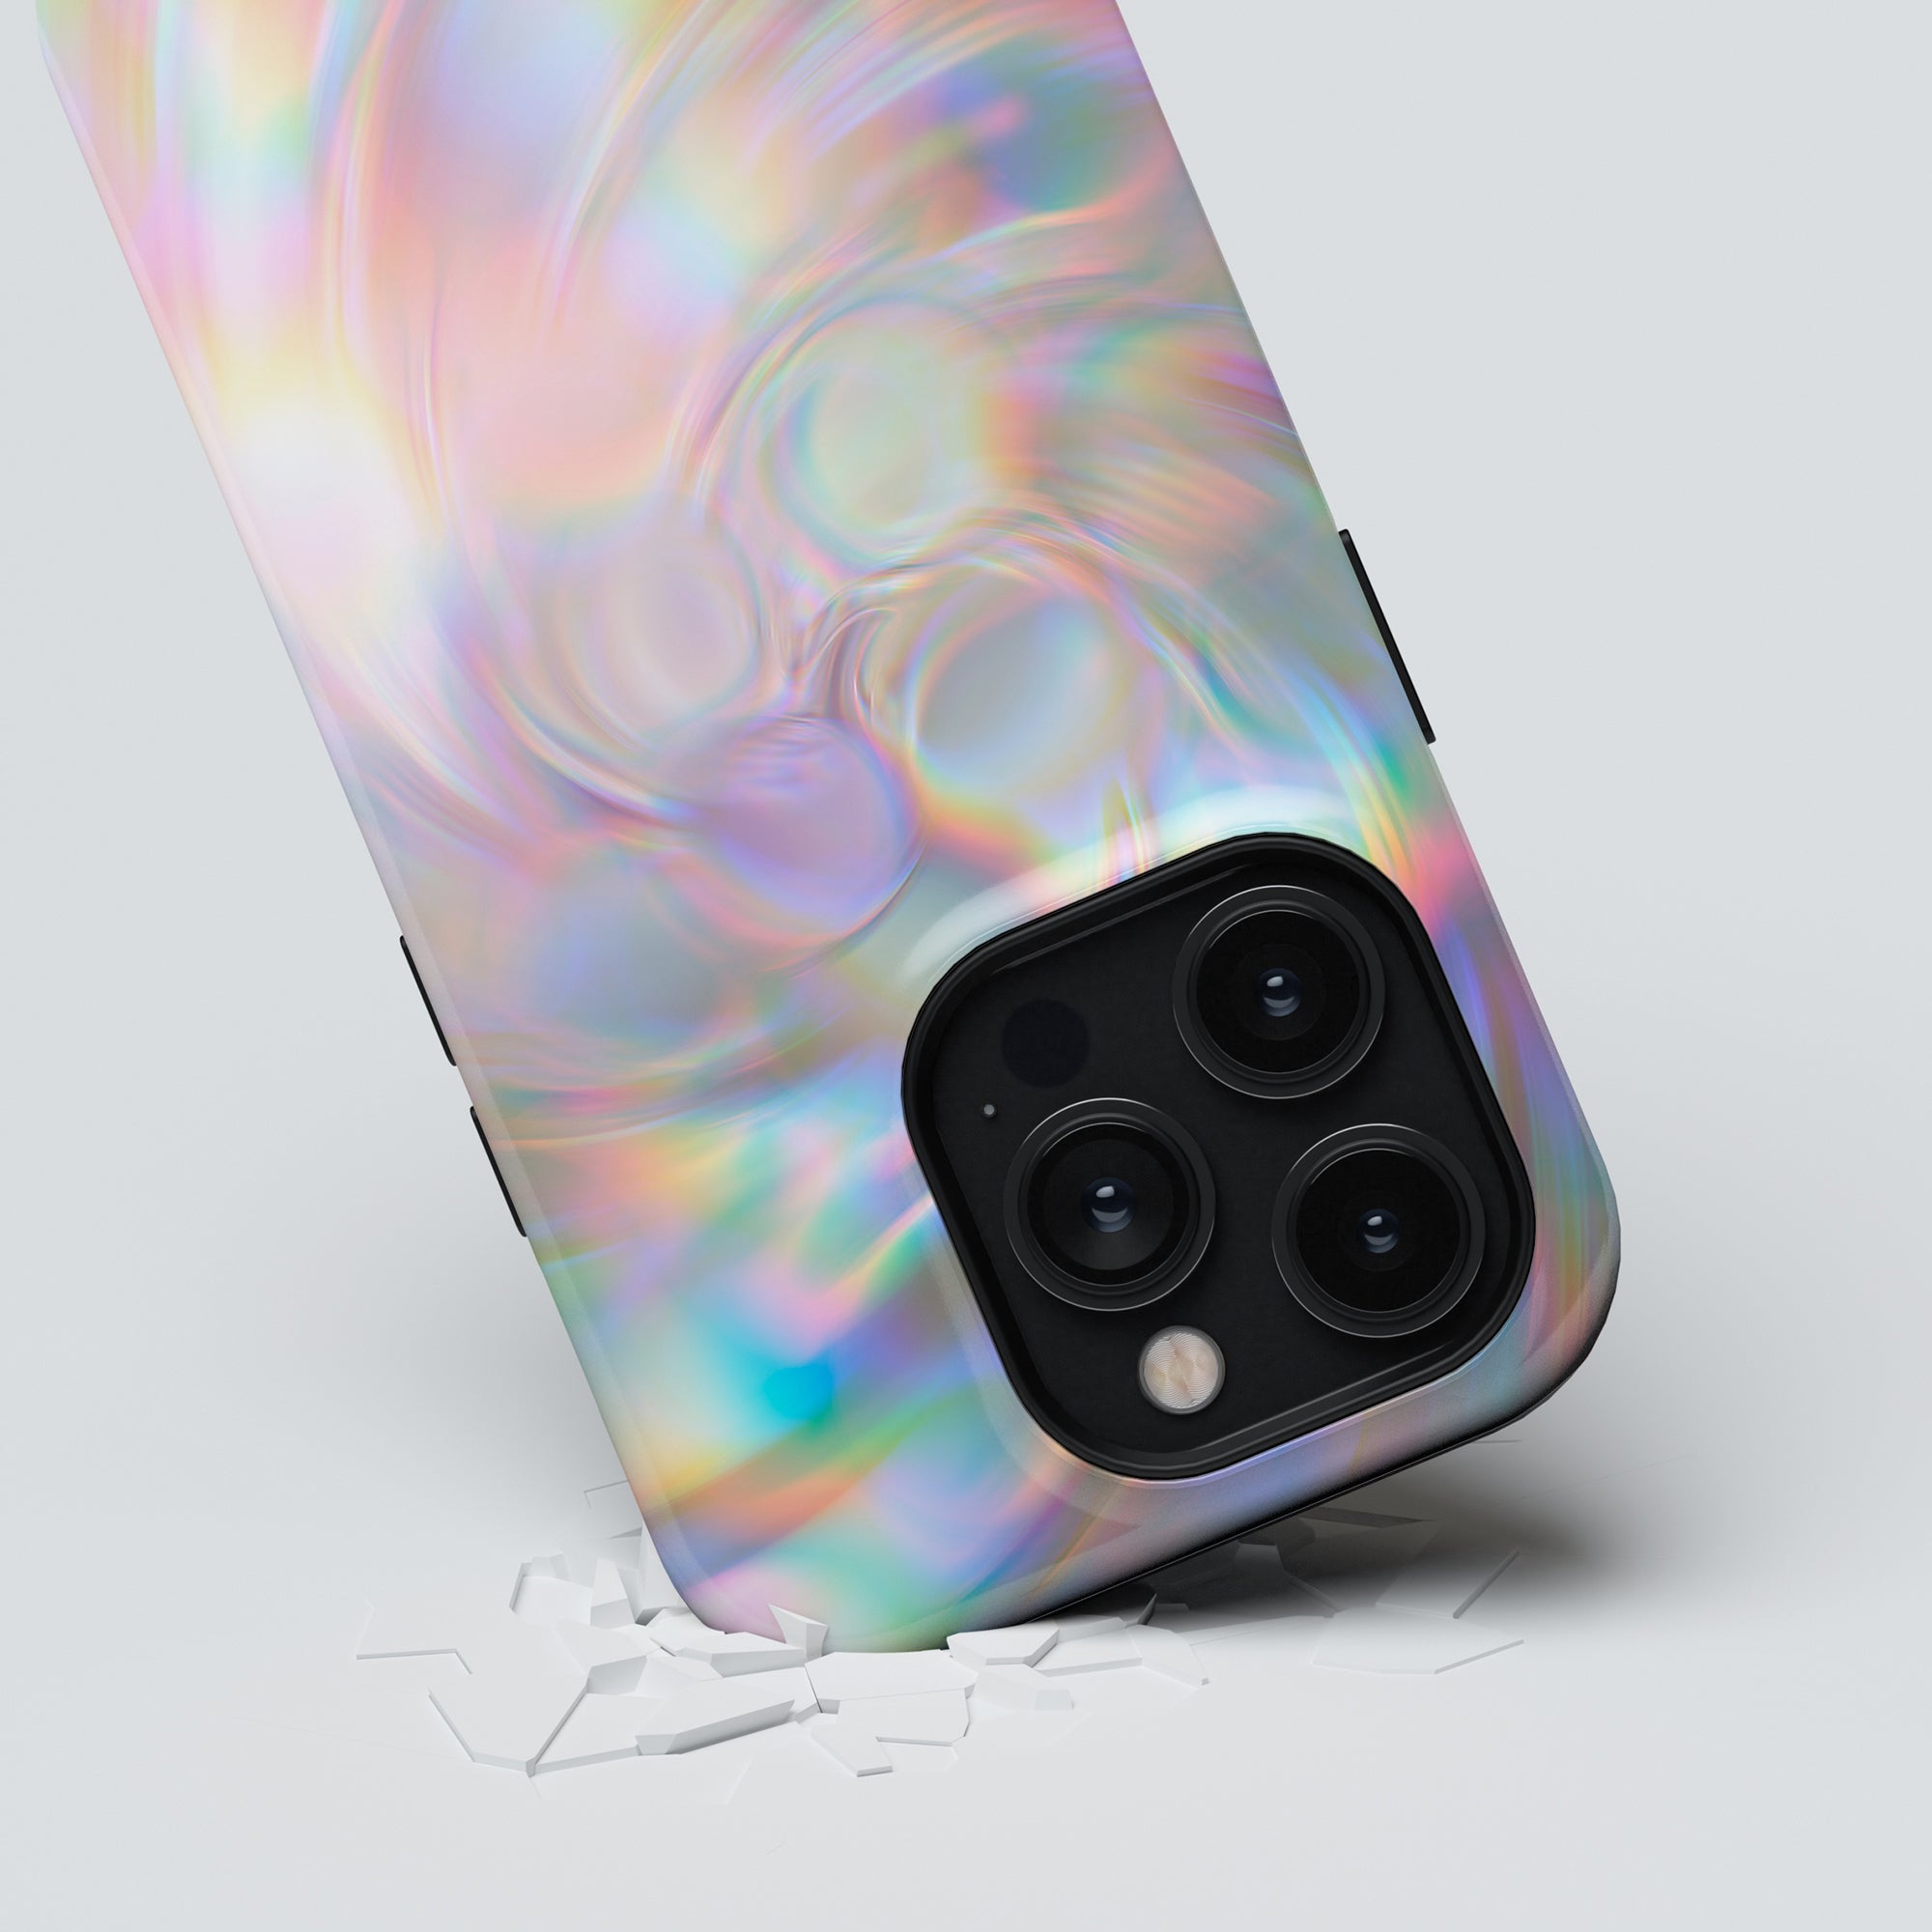 A smartphone with a holographic back and triple camera setup partially embedded in a white Pearl tough case, causing small cracks around it.